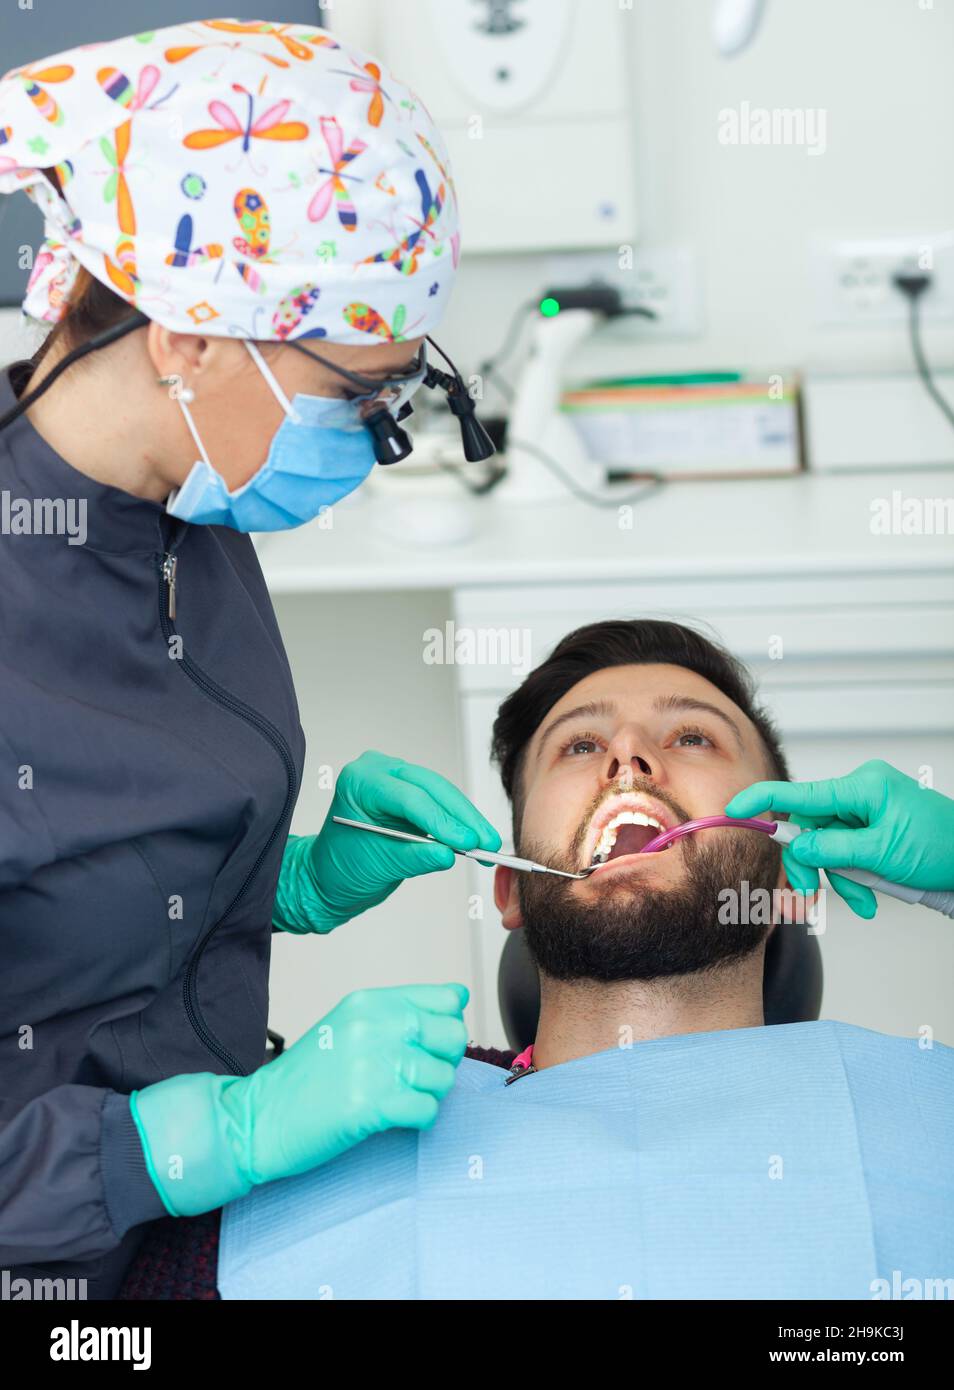 Female dentist examines a man patient in a dental office using professional tools and personal protective equipment. Stock Photo